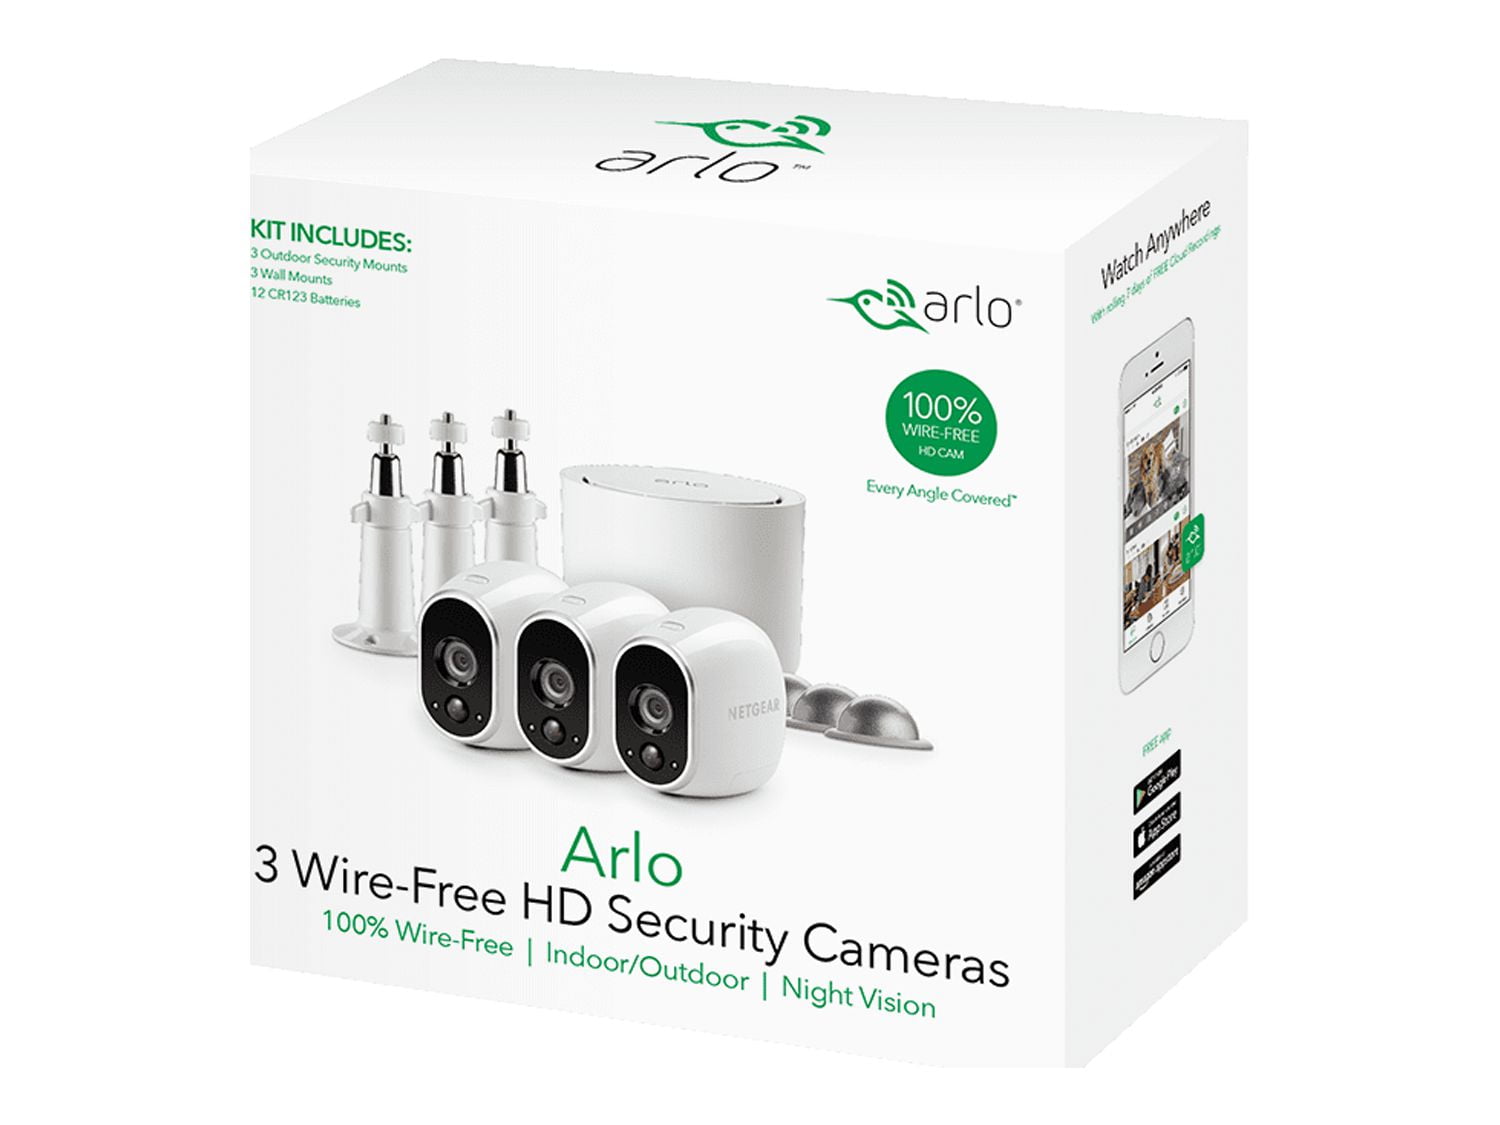 Arlo 720P HD Security Camera System VMS3330W - 3 Wire-Free Cameras with 3  Additional Wall Mounts and 3 Outdoor Mounts, Indoor/Outdoor, Night Vision,  Motion Detection 